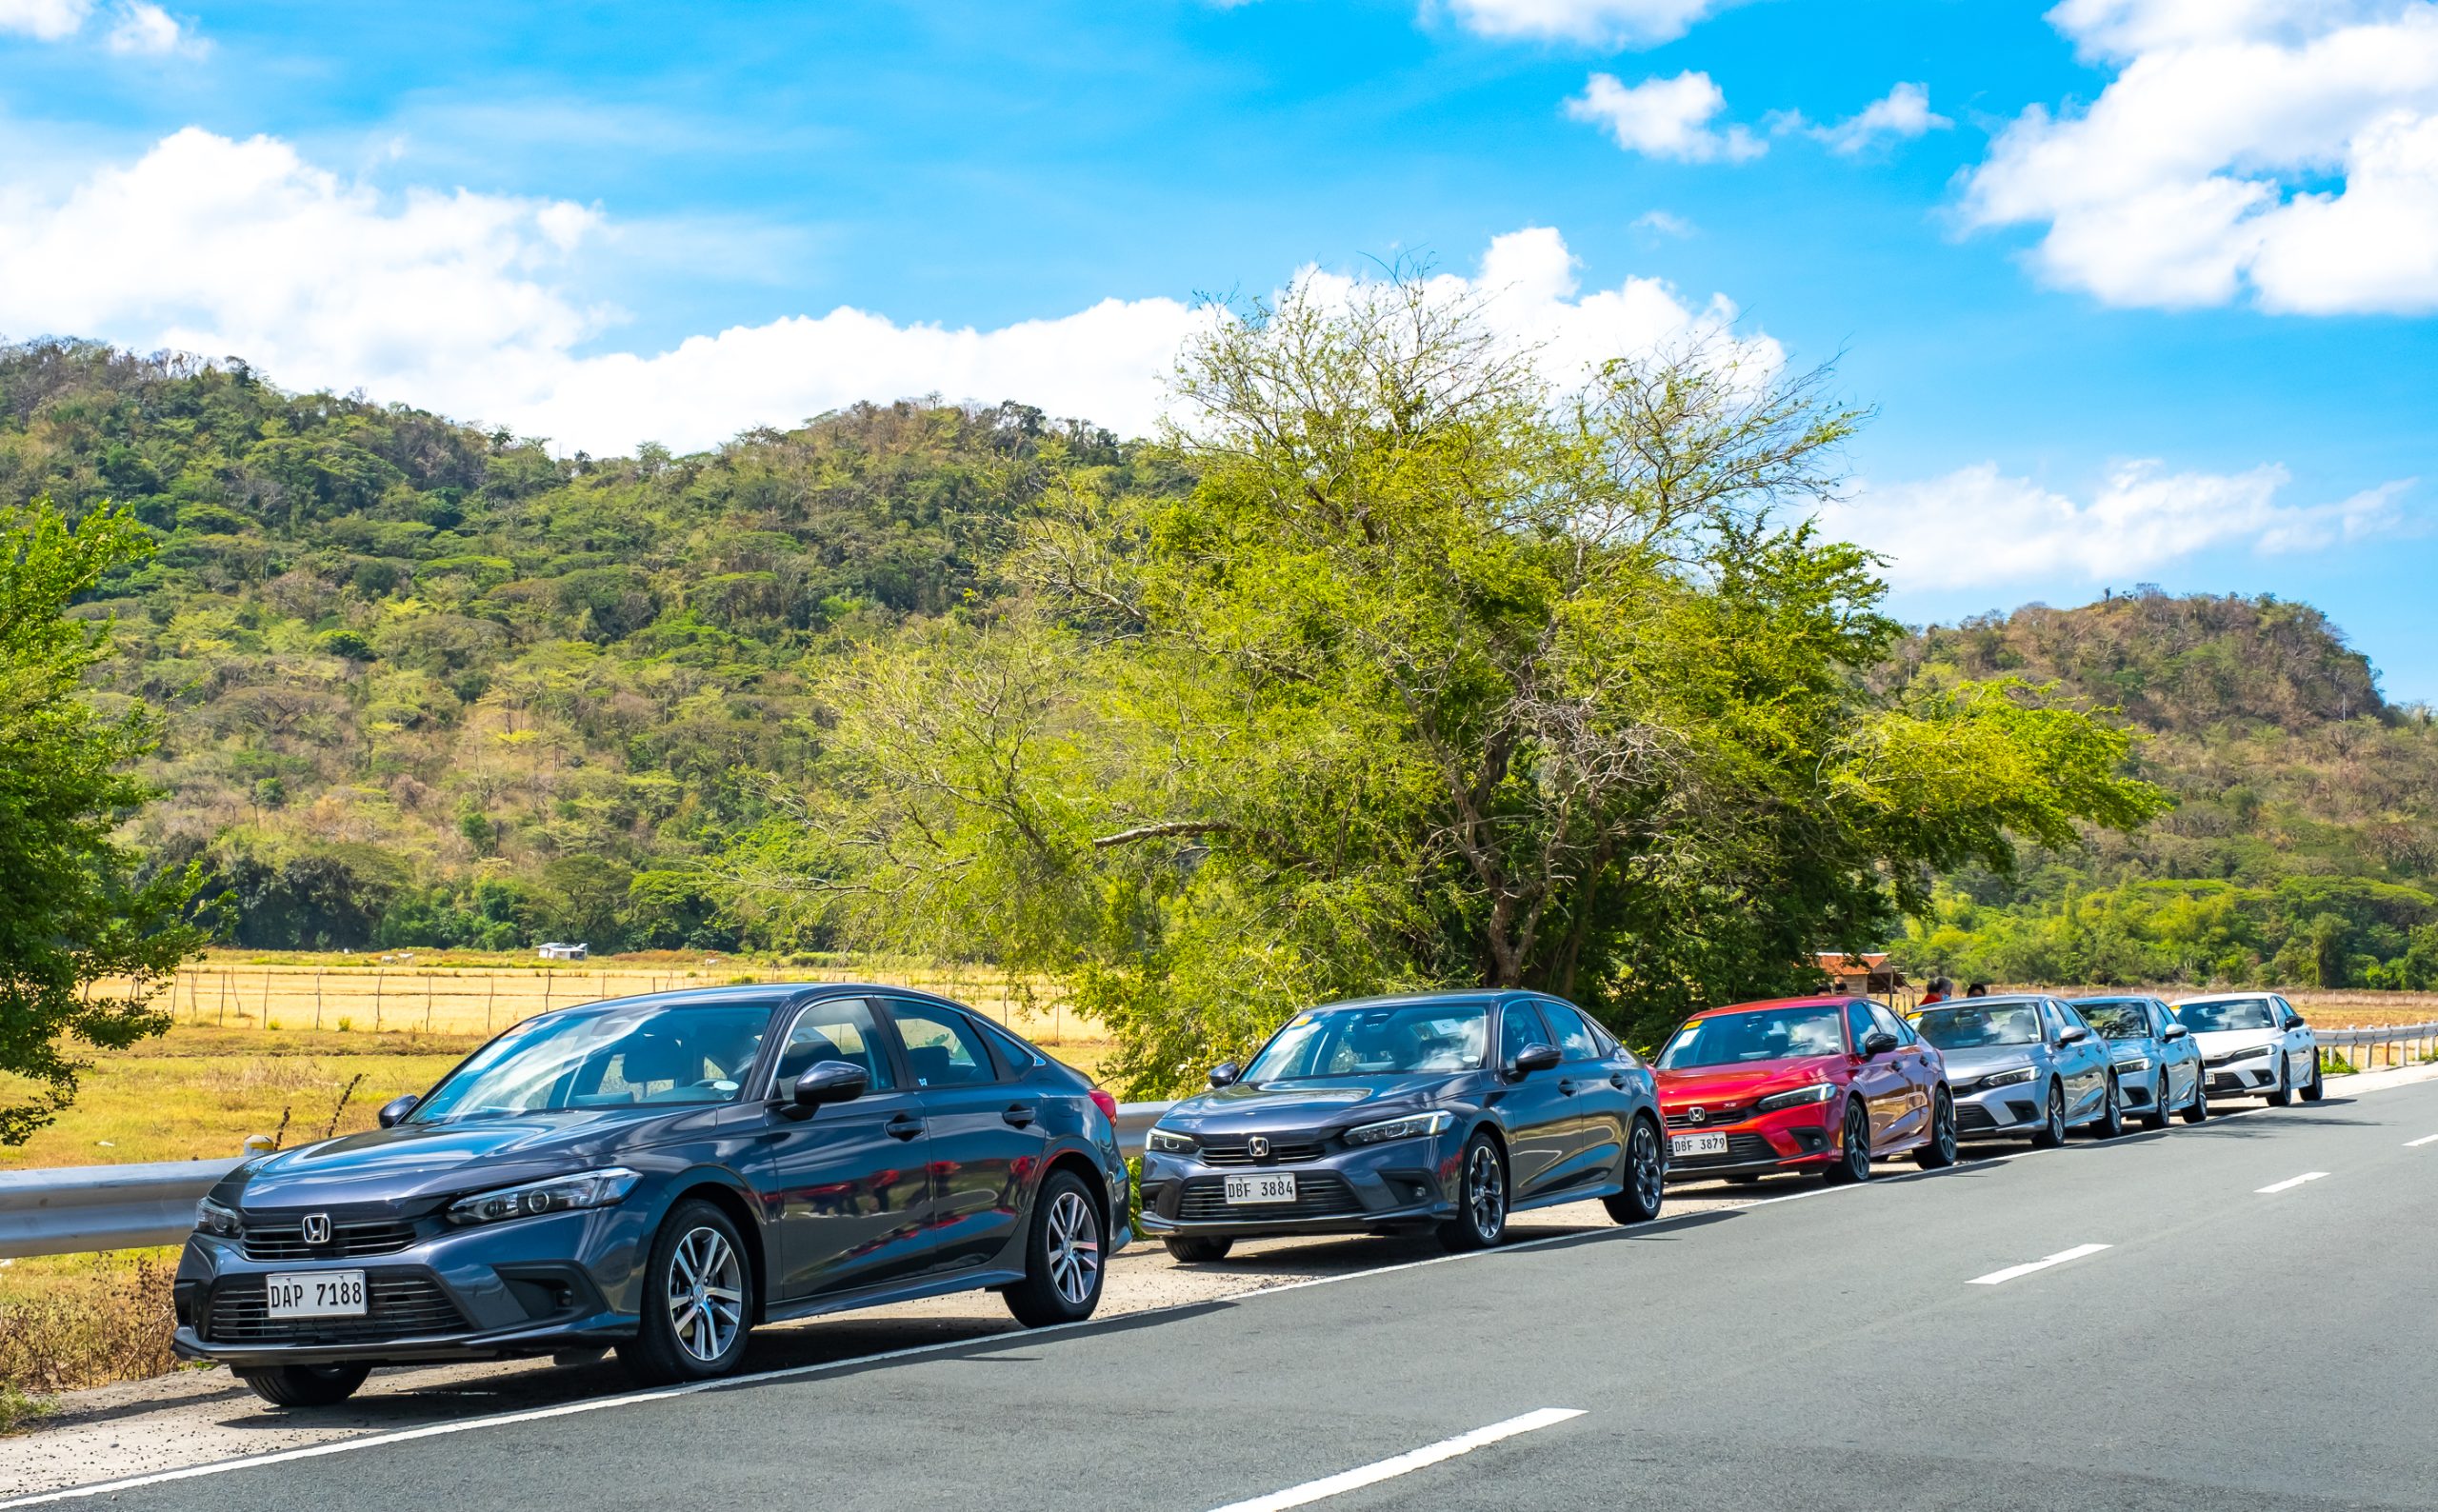 Heading south with the all-new Honda Civic